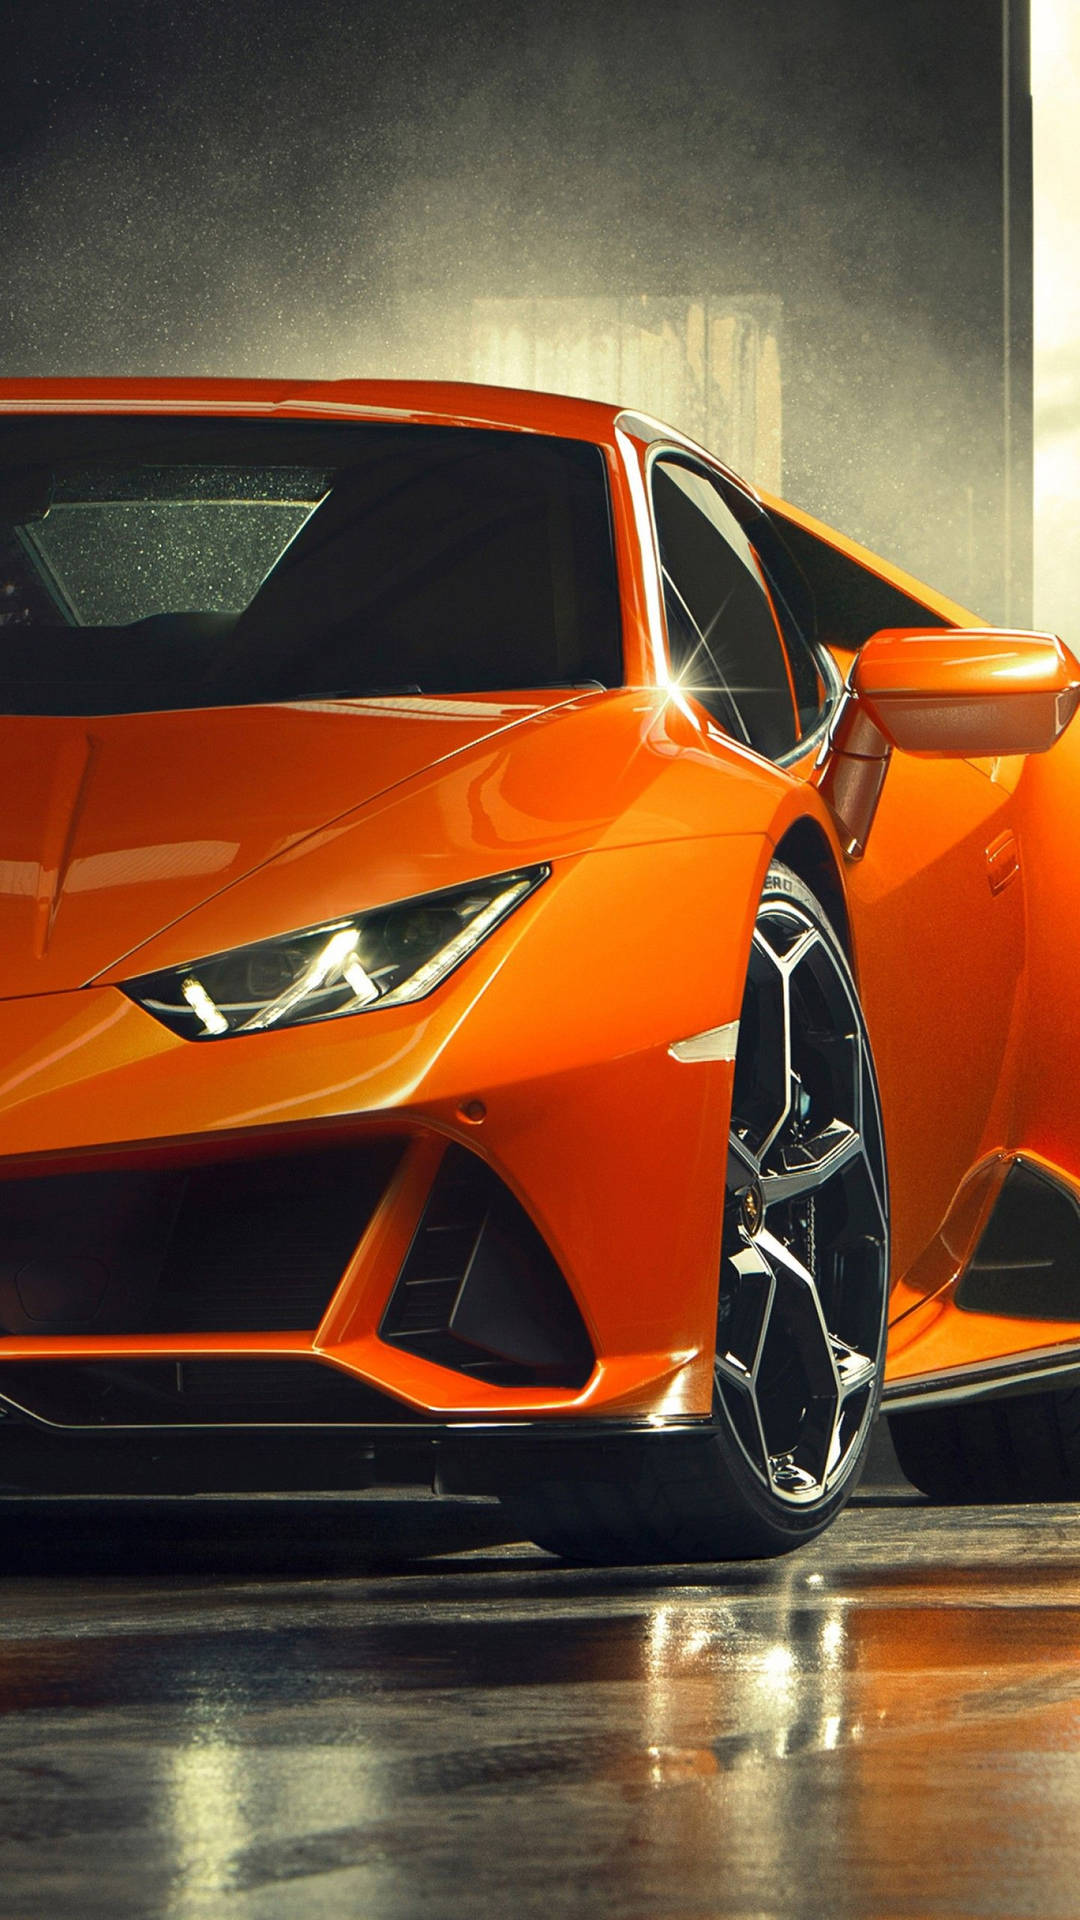 The Orange Sports Car Is Parked In A Garage Wallpaper